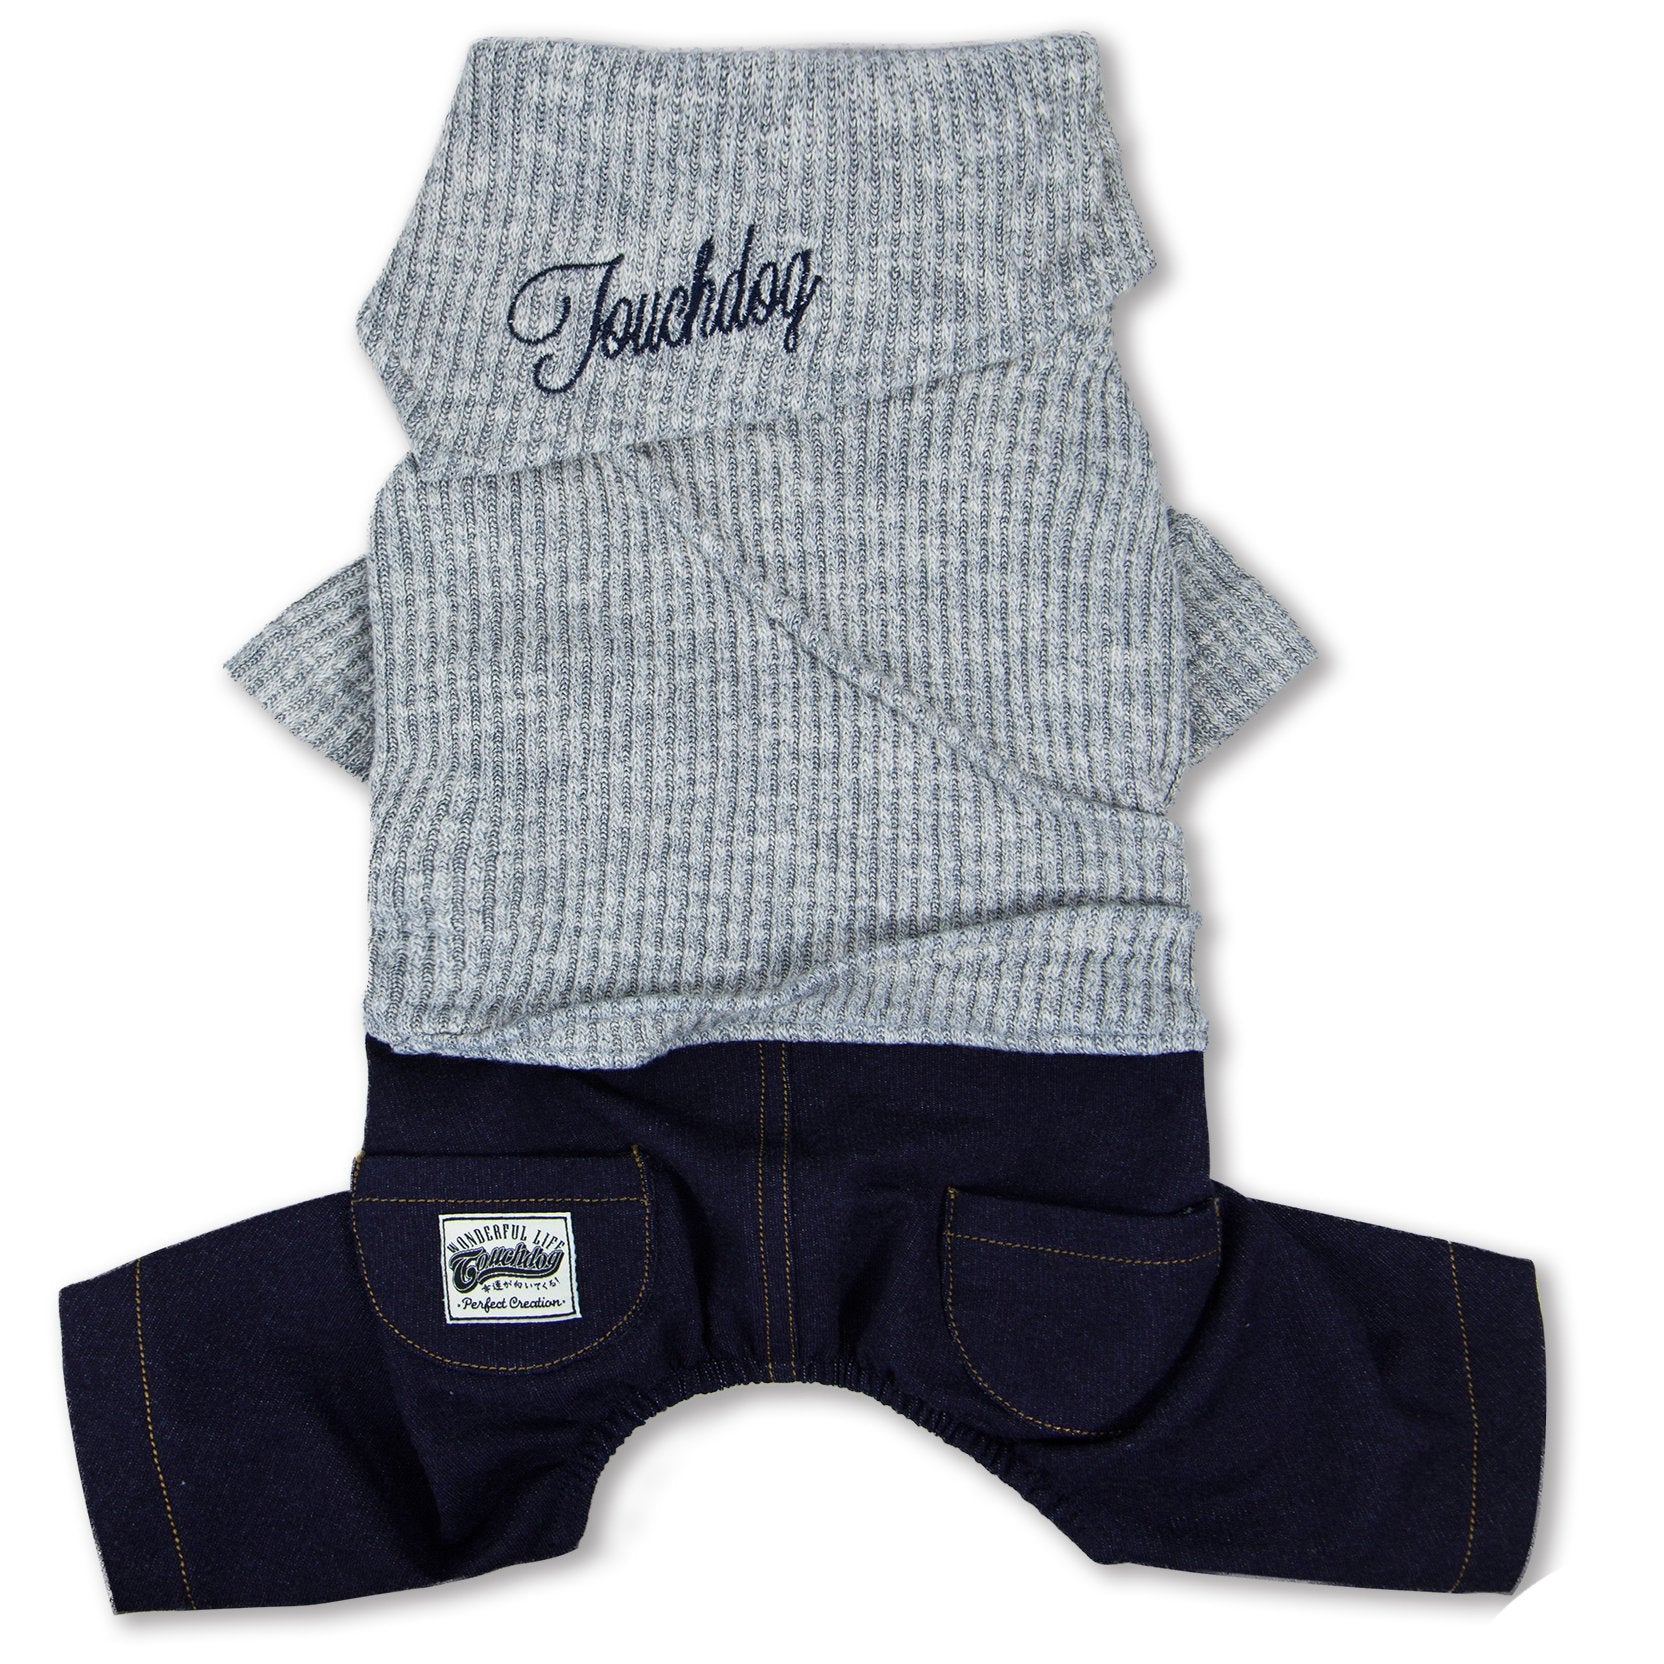 Touchdog Vogue Sweater & Denim Pant Outfit - Large - Grey